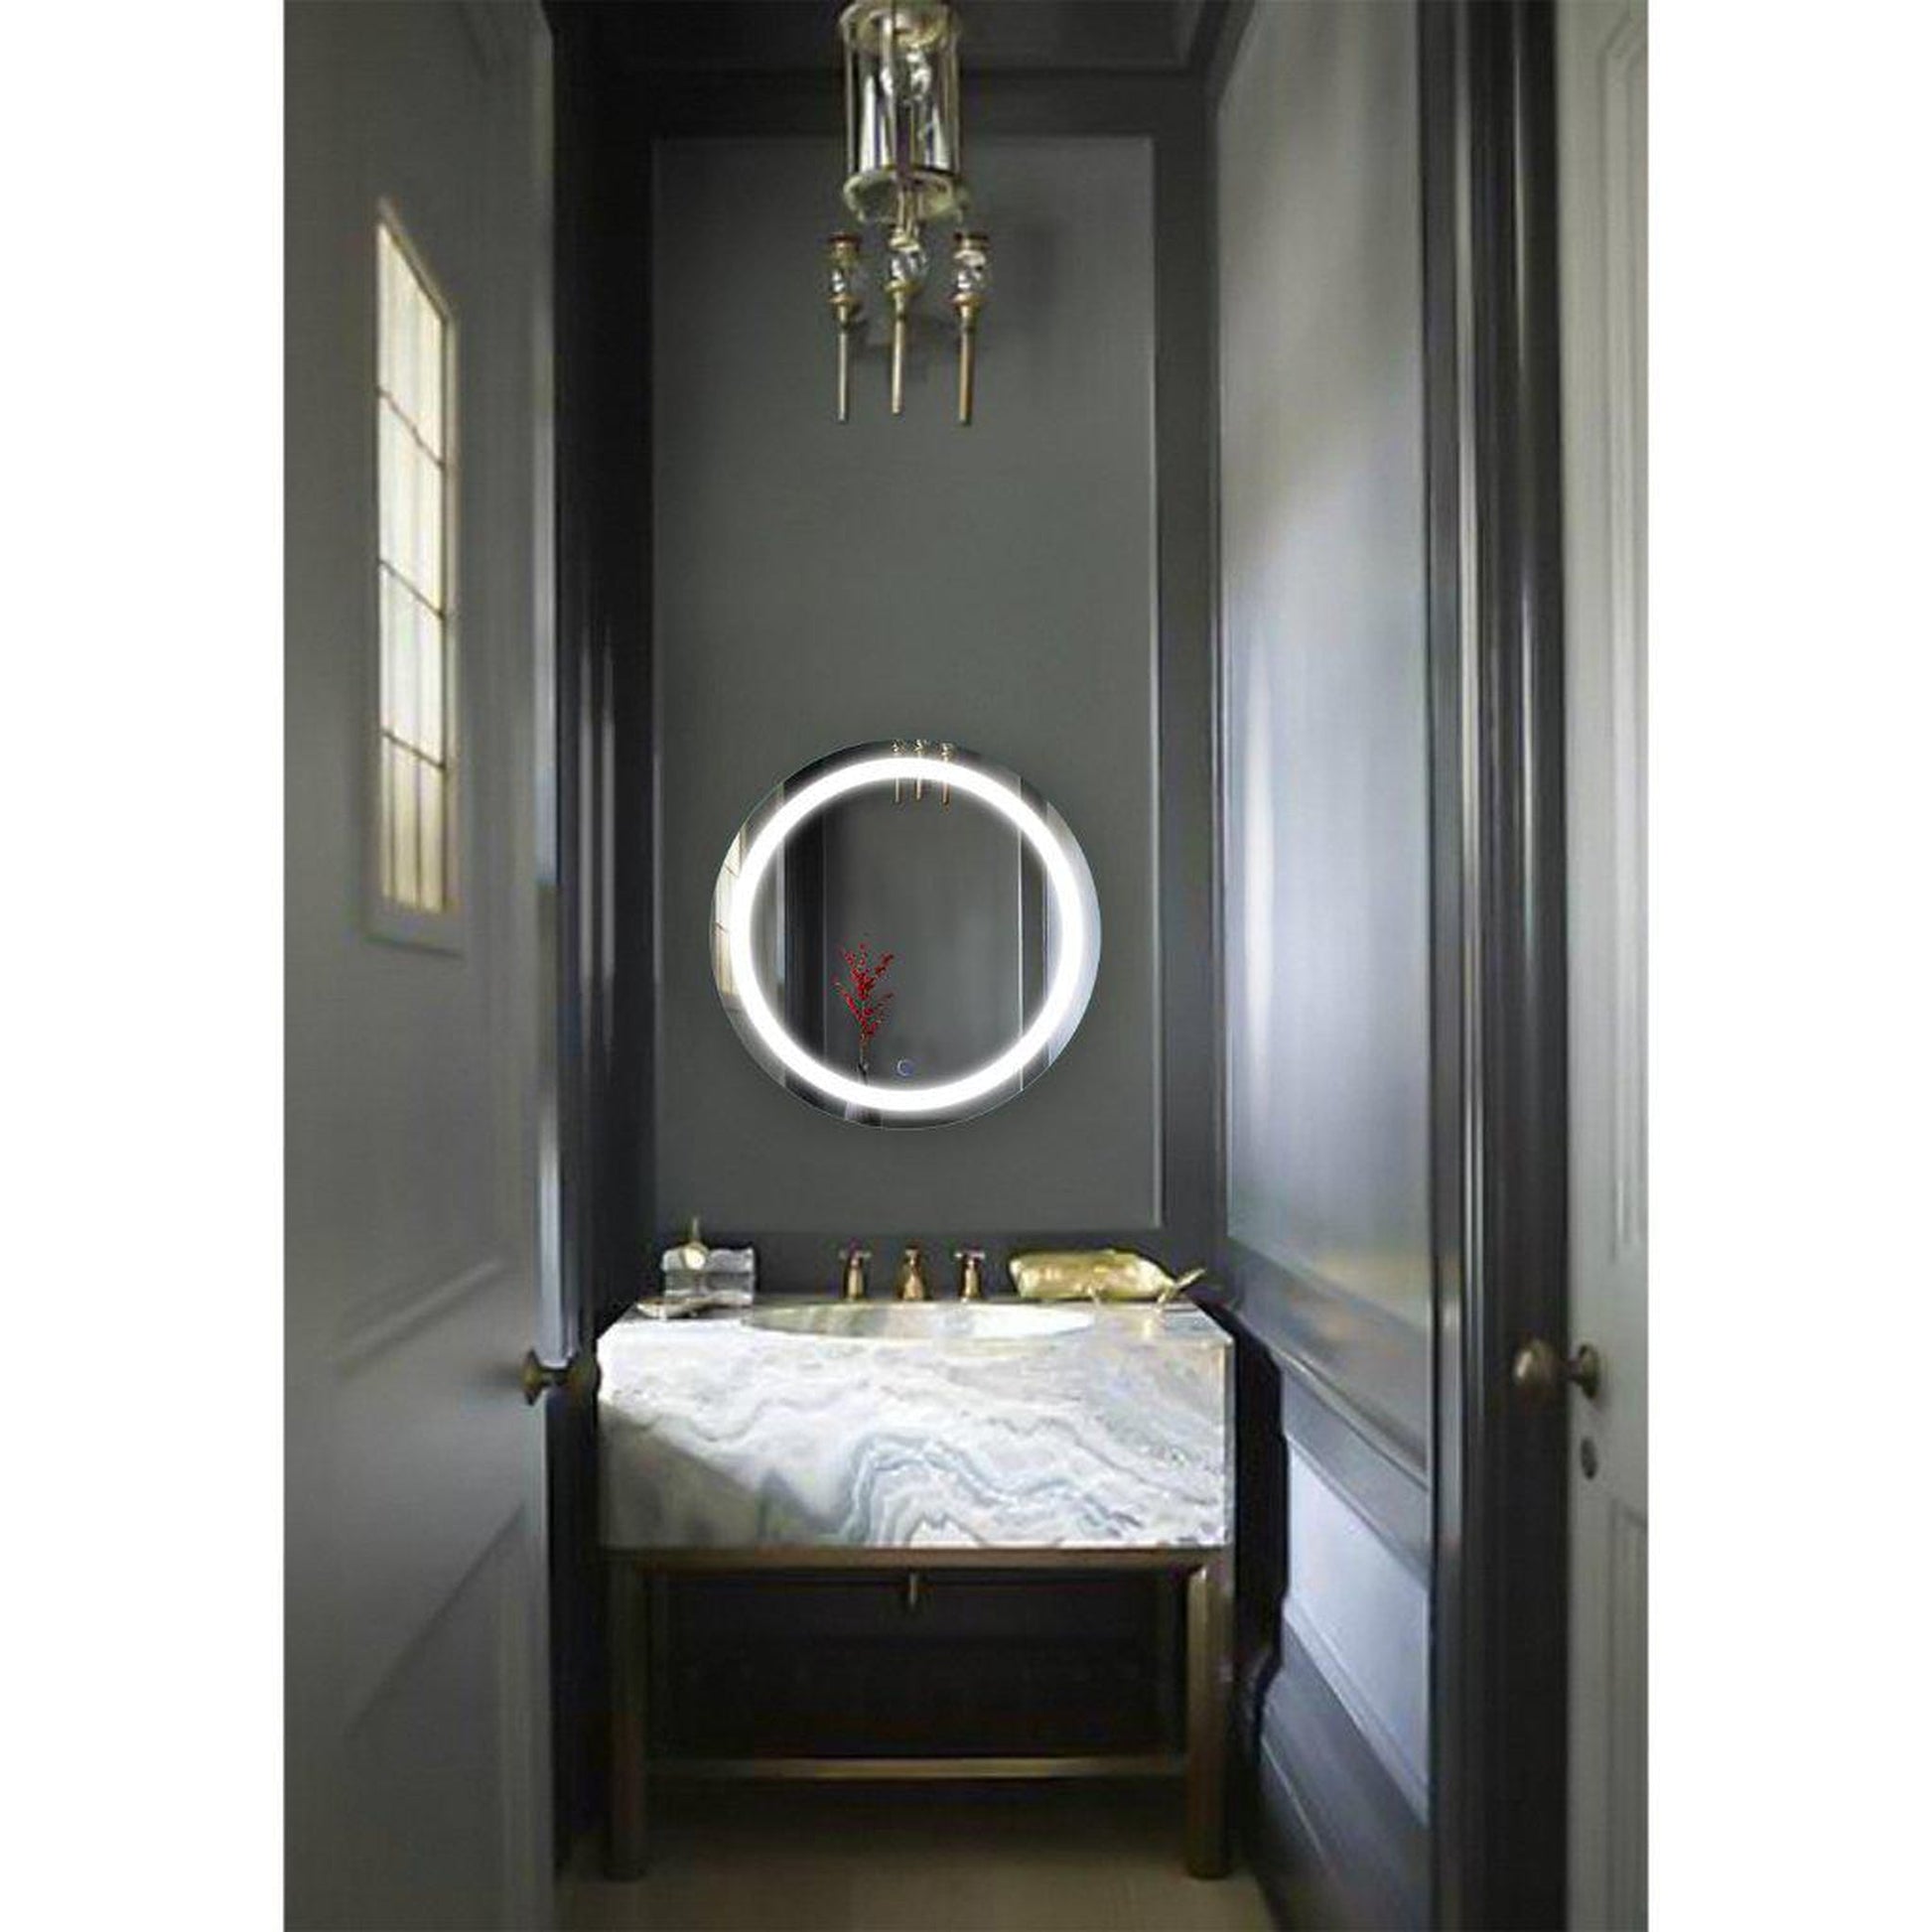 Krugg Reflections Icon 24" x 24" 5000K Round Wall-Mounted Illuminated Silver Backed LED Mirror With Built-in Defogger and Touch Sensor On/Off Built-in Dimmer